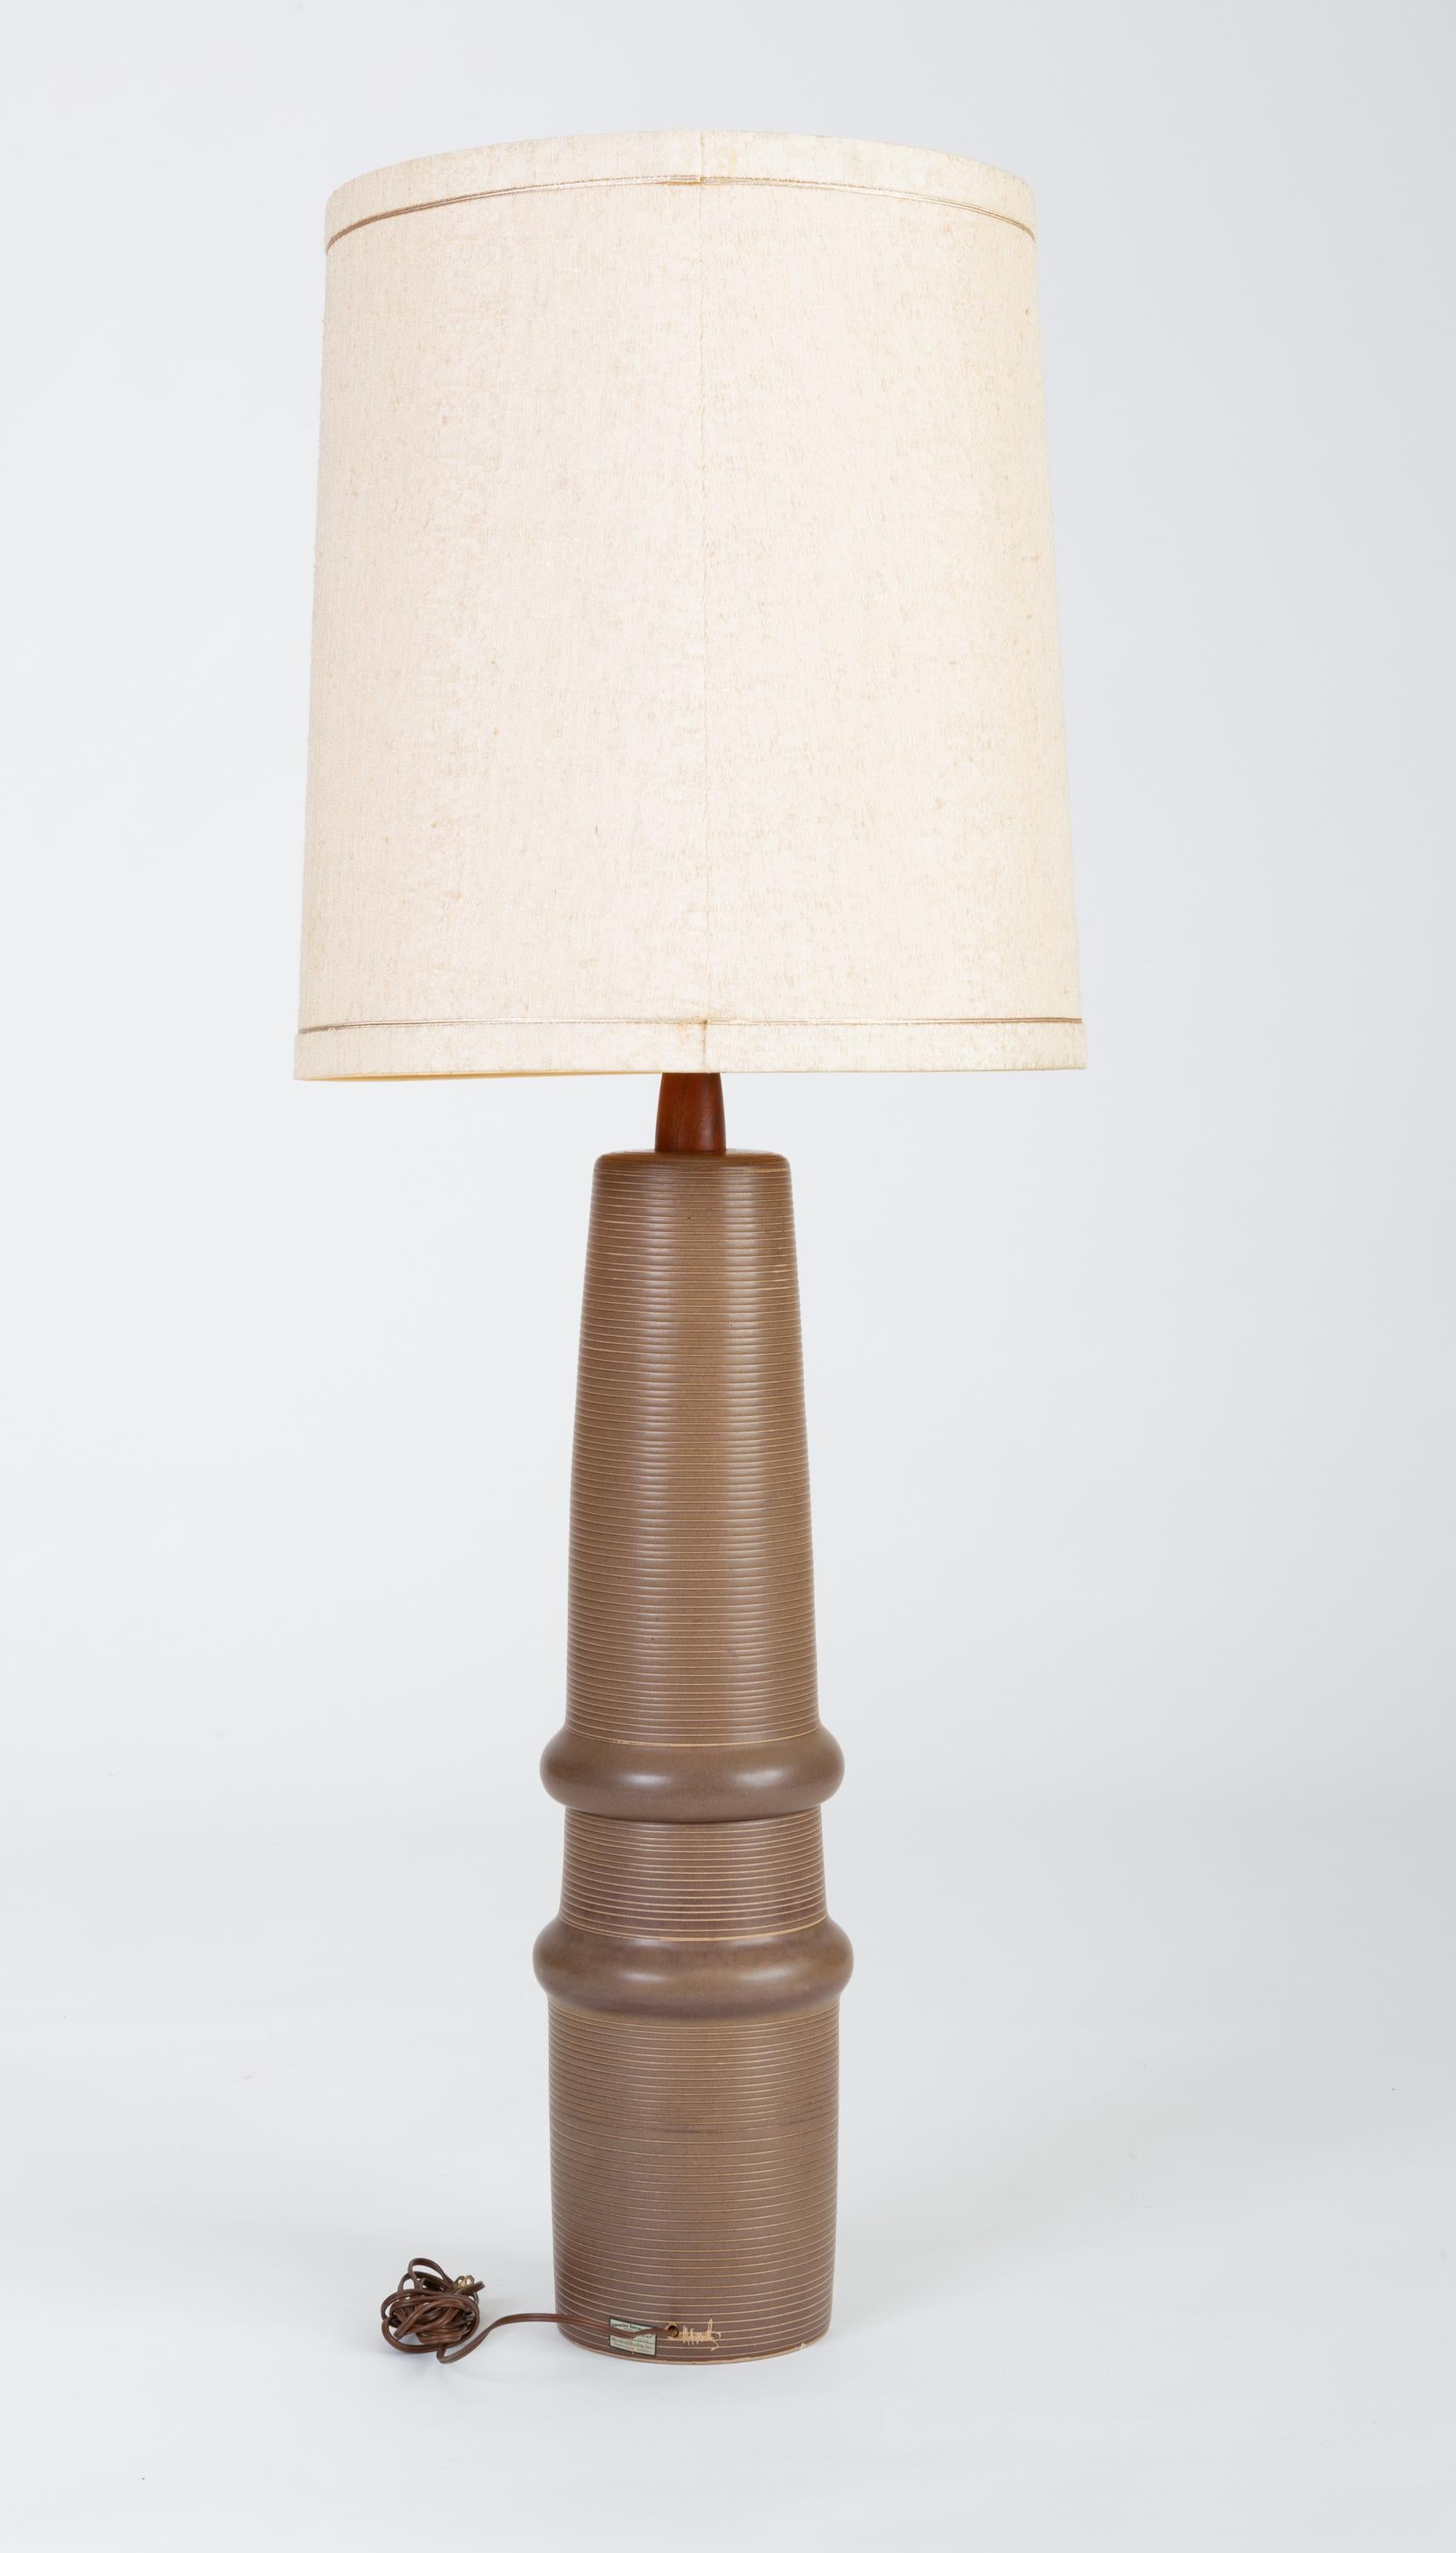 American Tall Stoneware Lamp by Gordon and Jane Martz for Marshall Studios